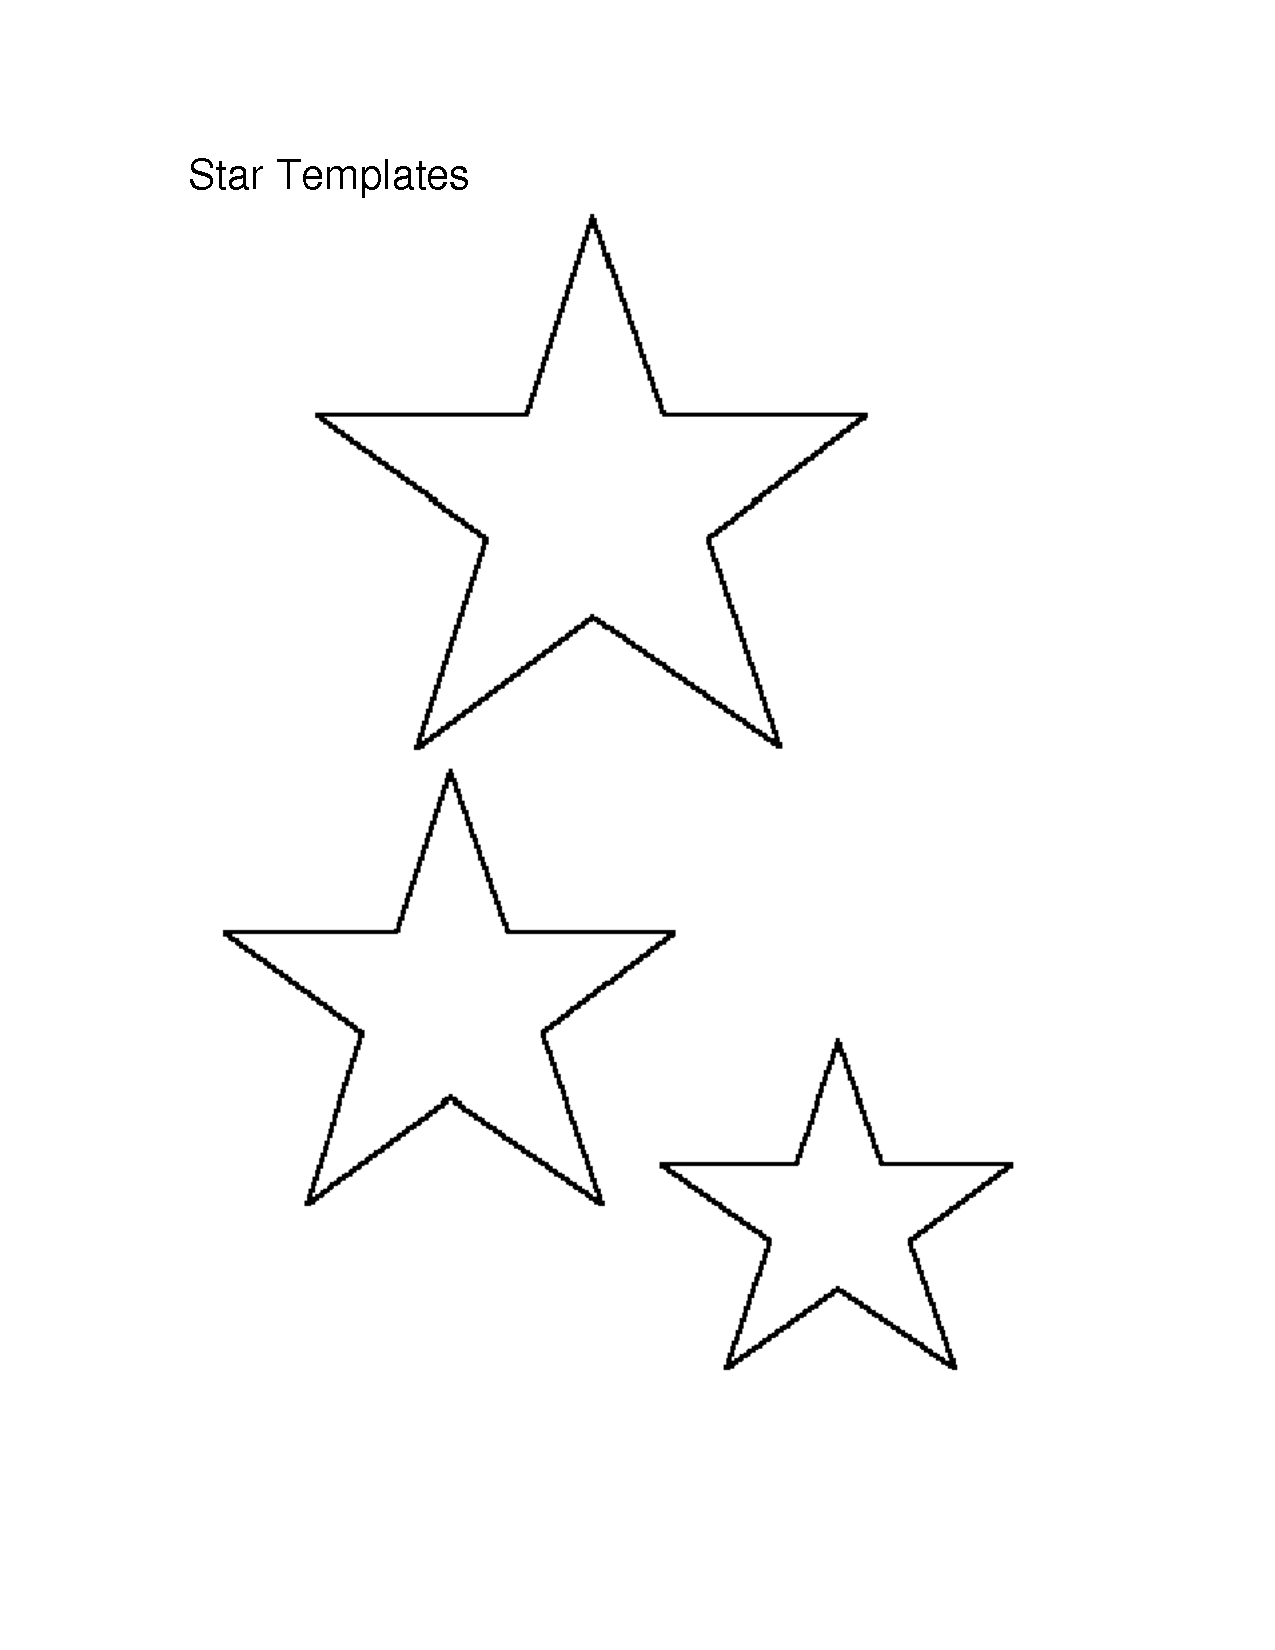 7-best-images-of-free-printable-star-templates-large-star-template-stars-outline-template